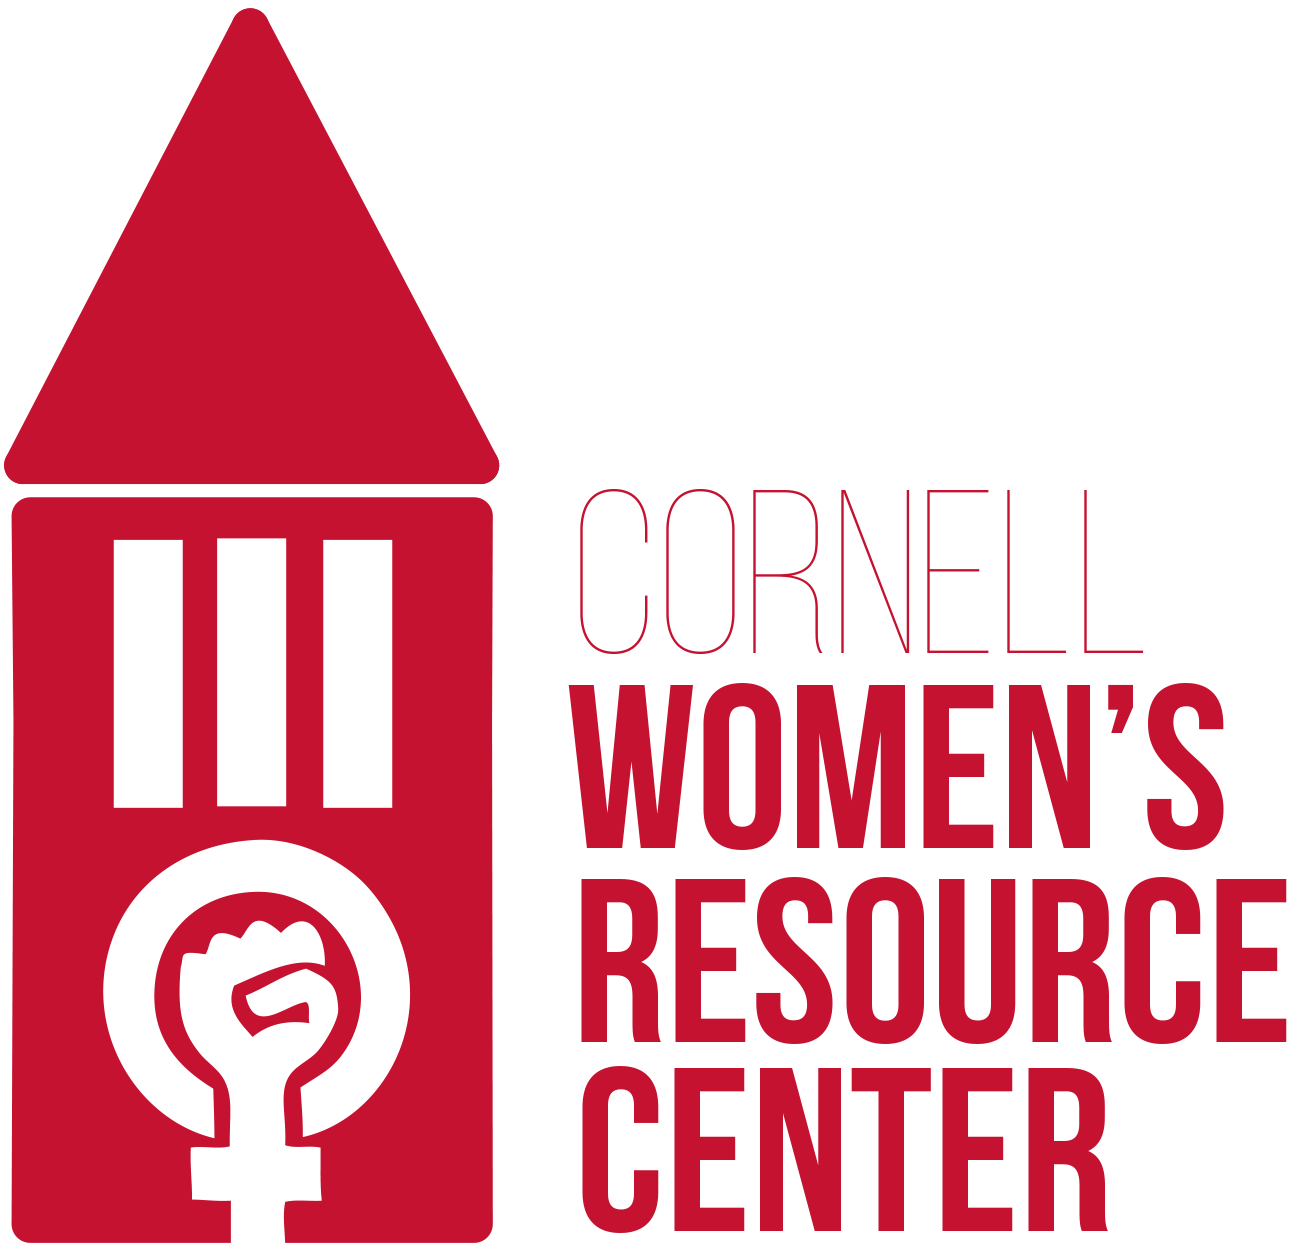  The Cornell Women's Resource Center lacked a logo that connected it to the university and its students. This was remedied by including a clock tower design with a feminist power fist at the center, acting as the clock face. The typeface is dignified